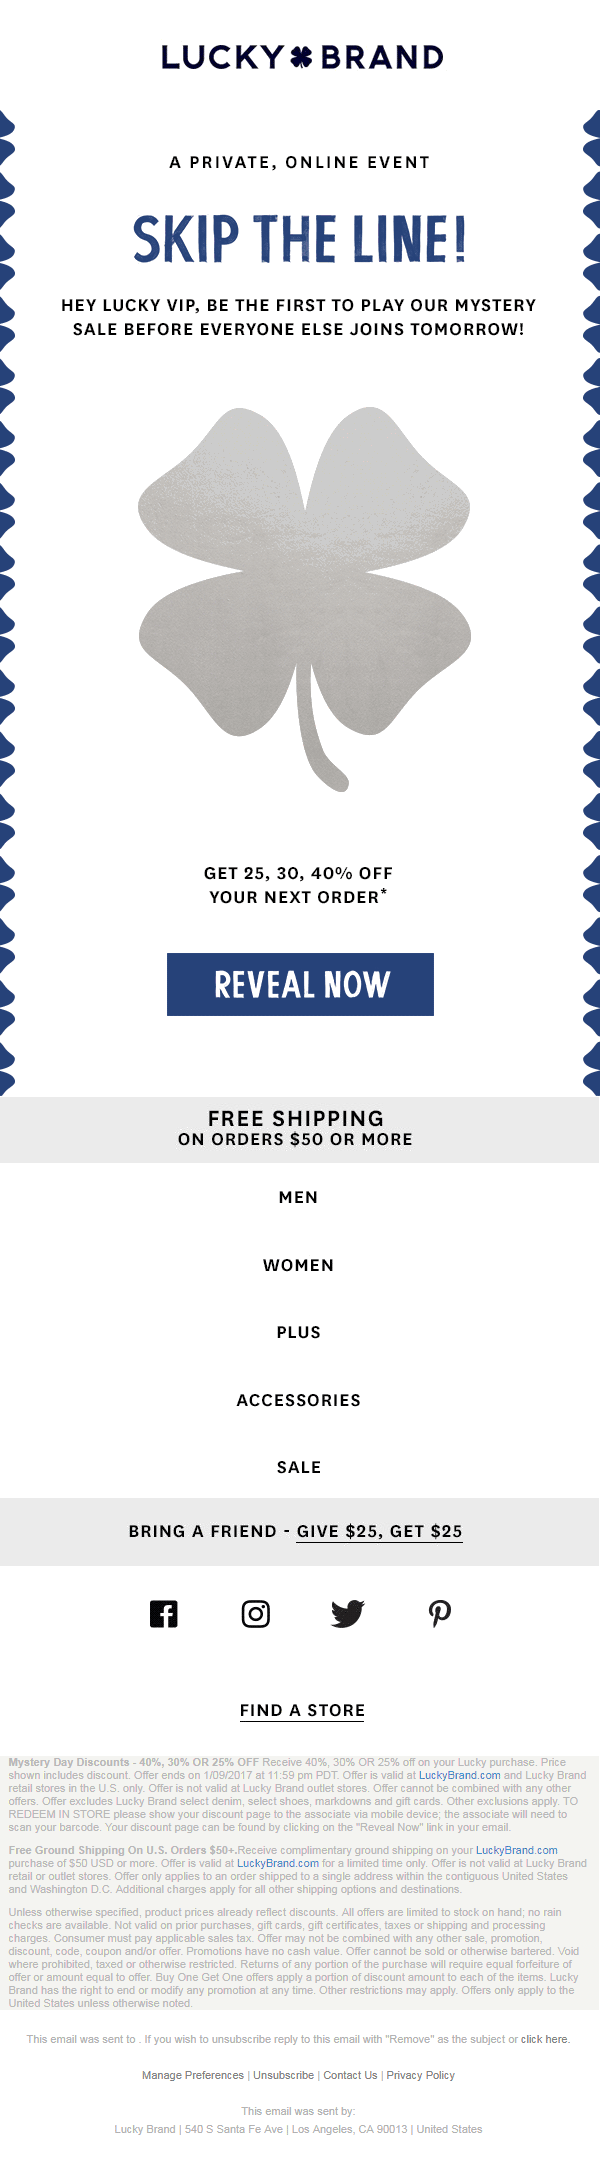 VIP loyalty in email shown by Lucky Brand